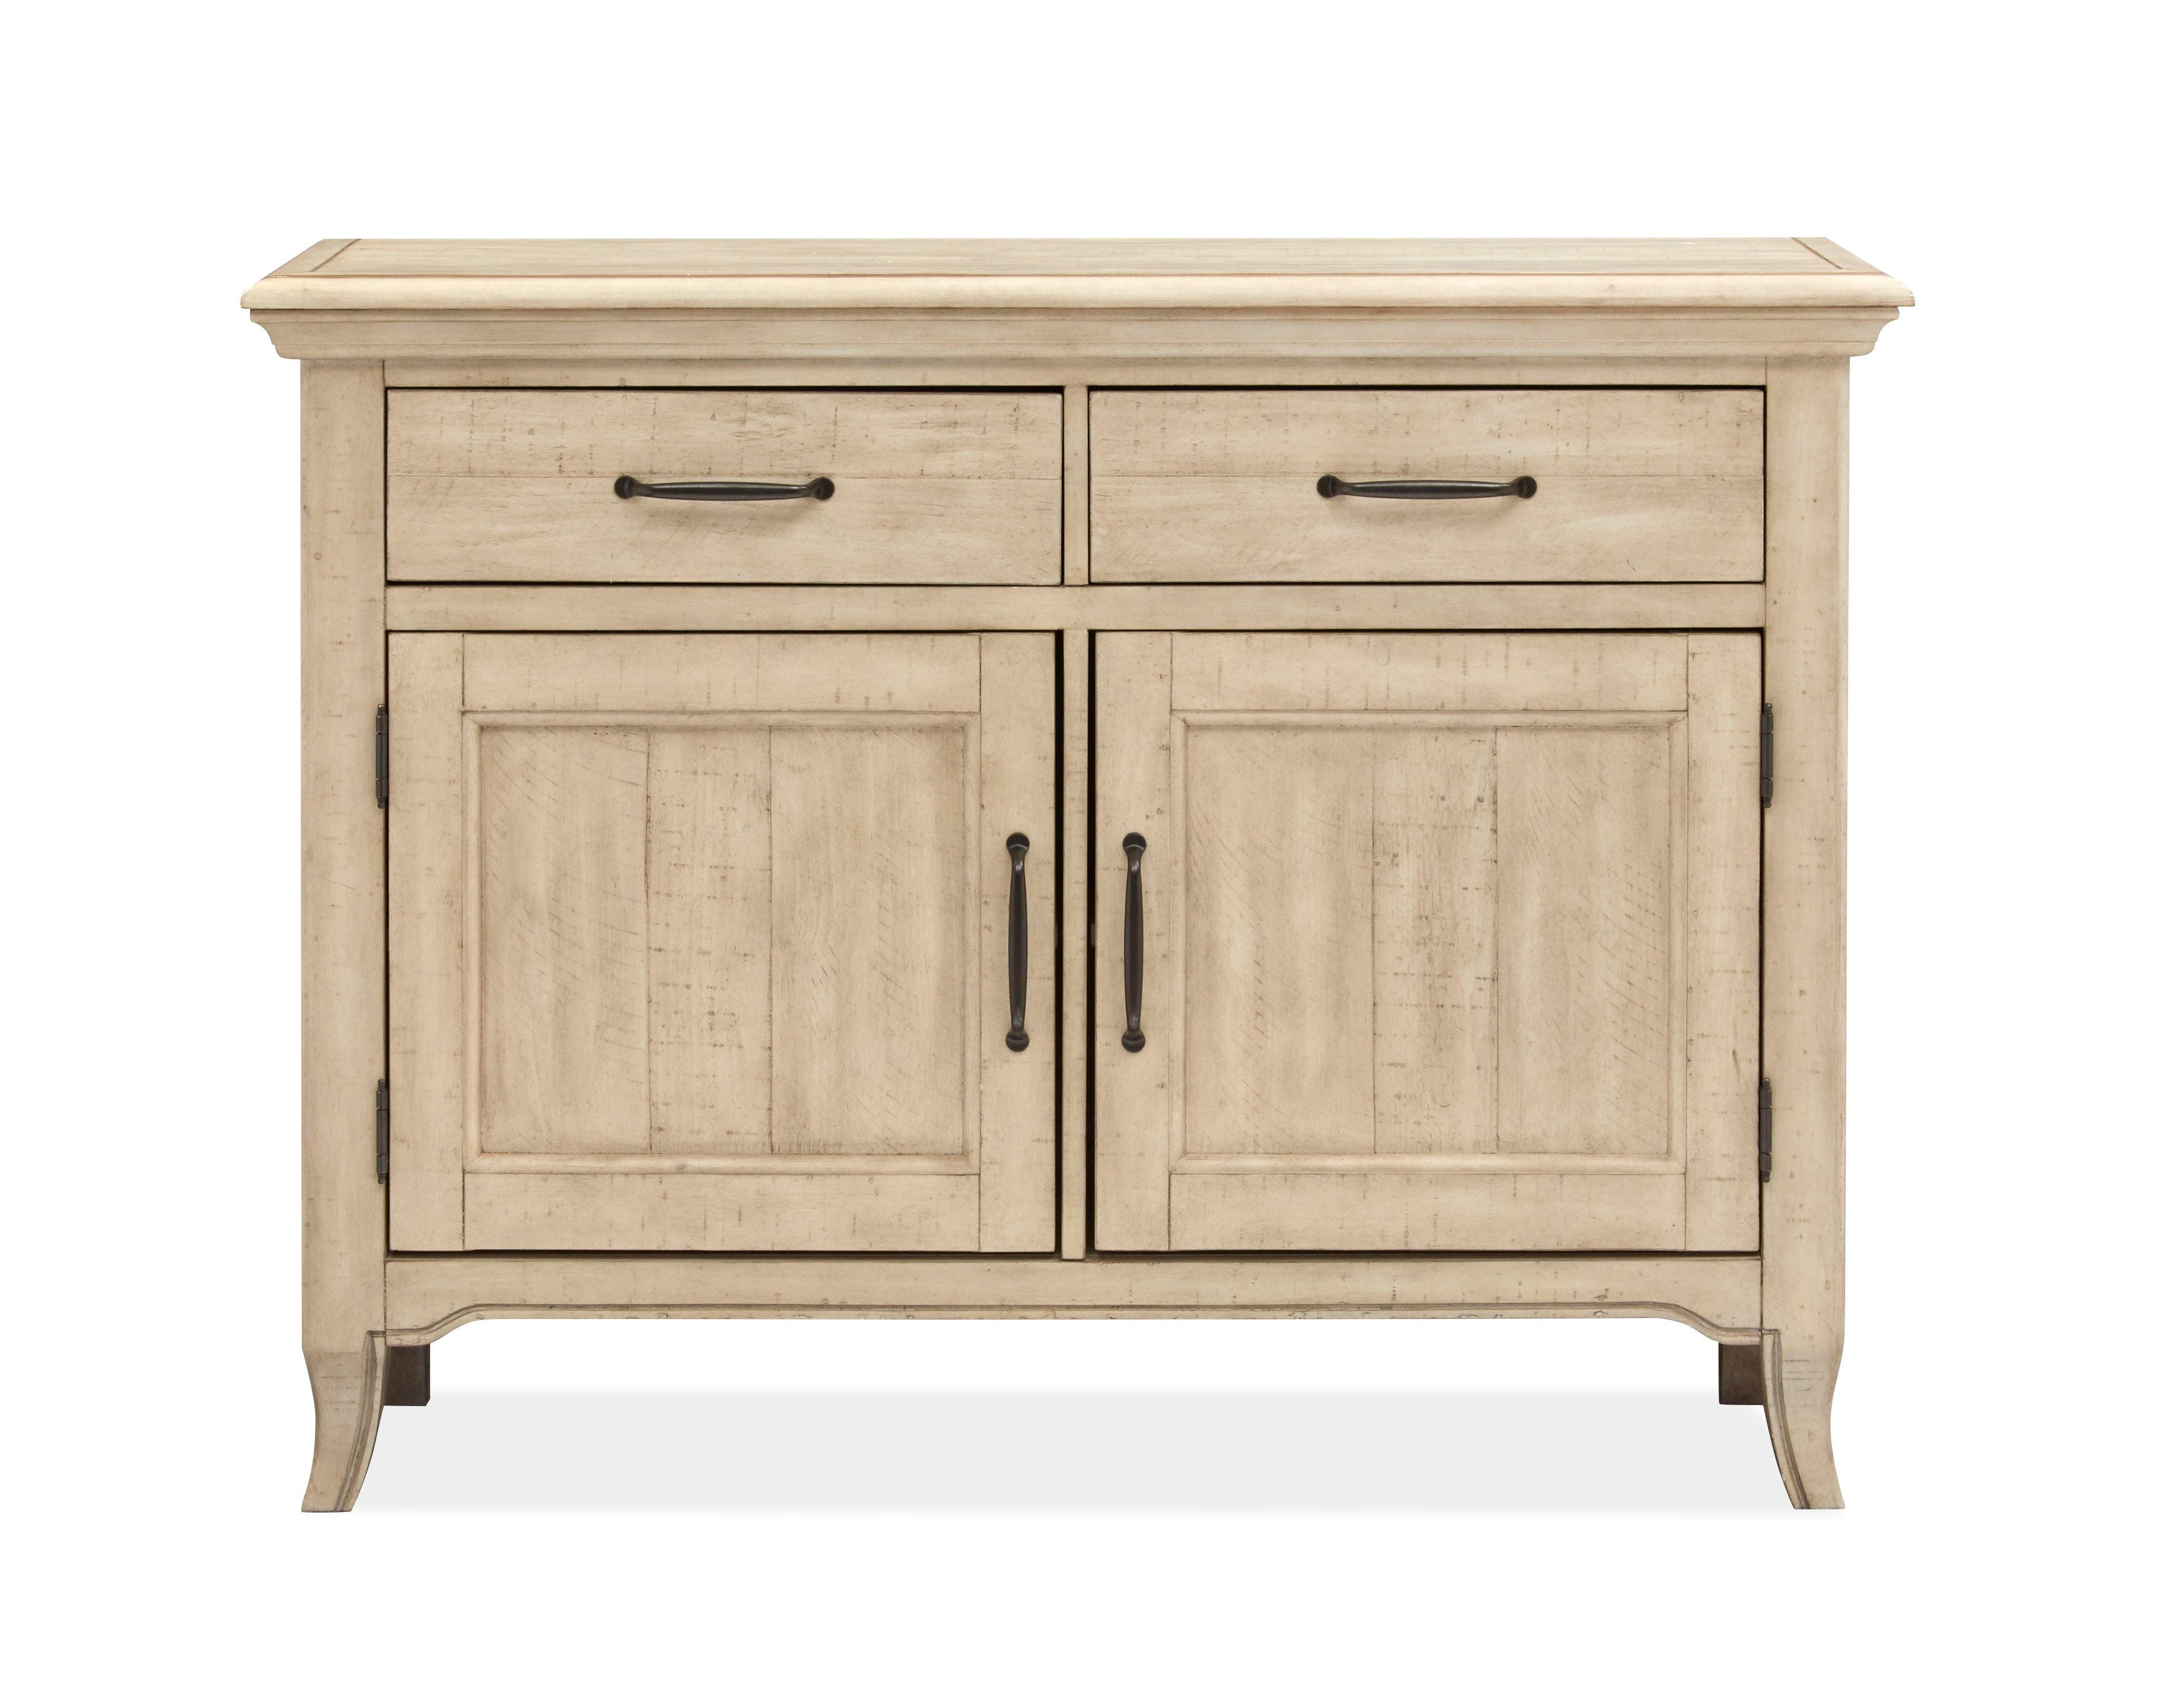 Magnussen Furniture - Harlow - Buffet - Weathered Bisque - 5th Avenue Furniture